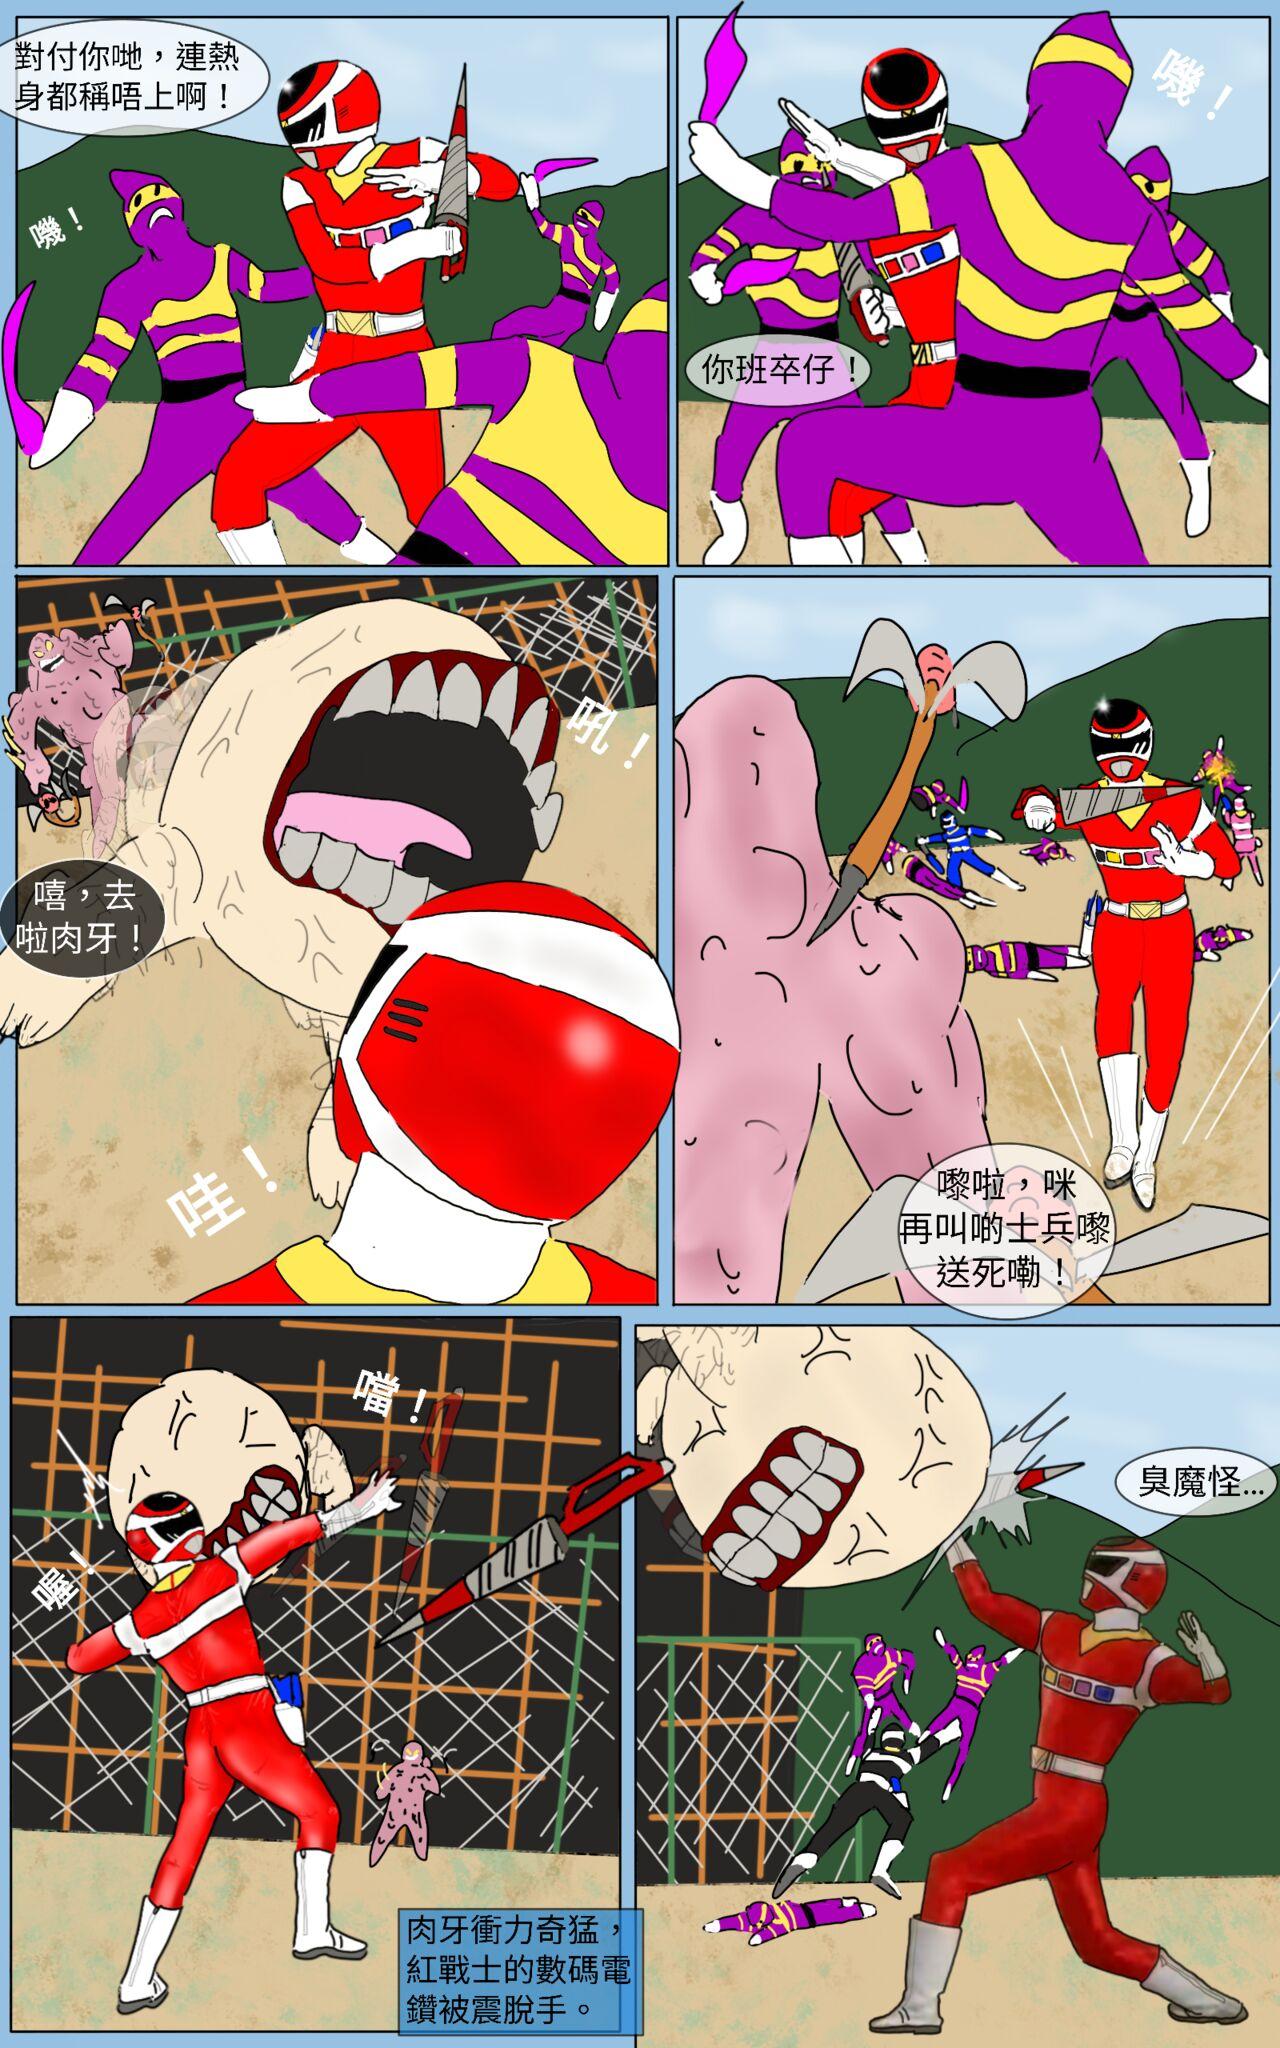 Blondes Mission 33 - Super sentai Hot Girl - Page 3